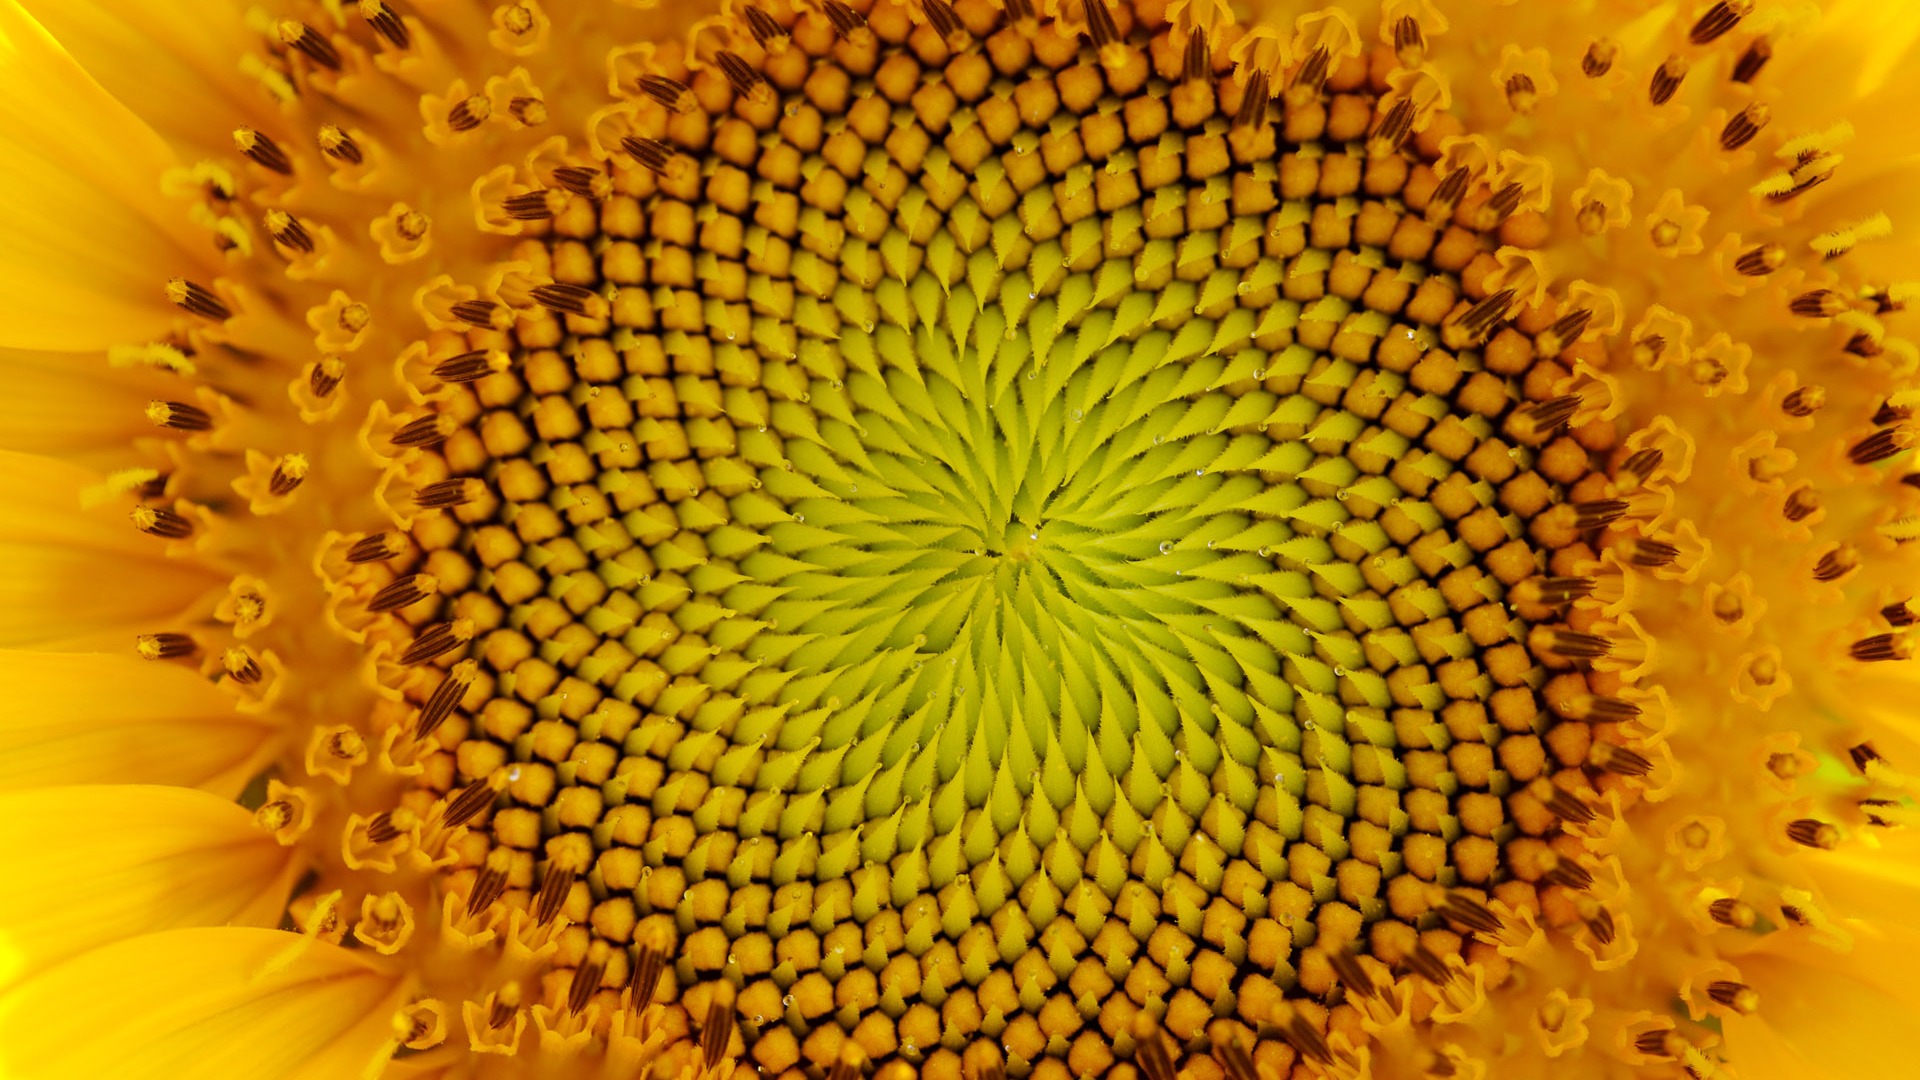 Sunny sunflower photo HD Wallpapers #30 - 1920x1080